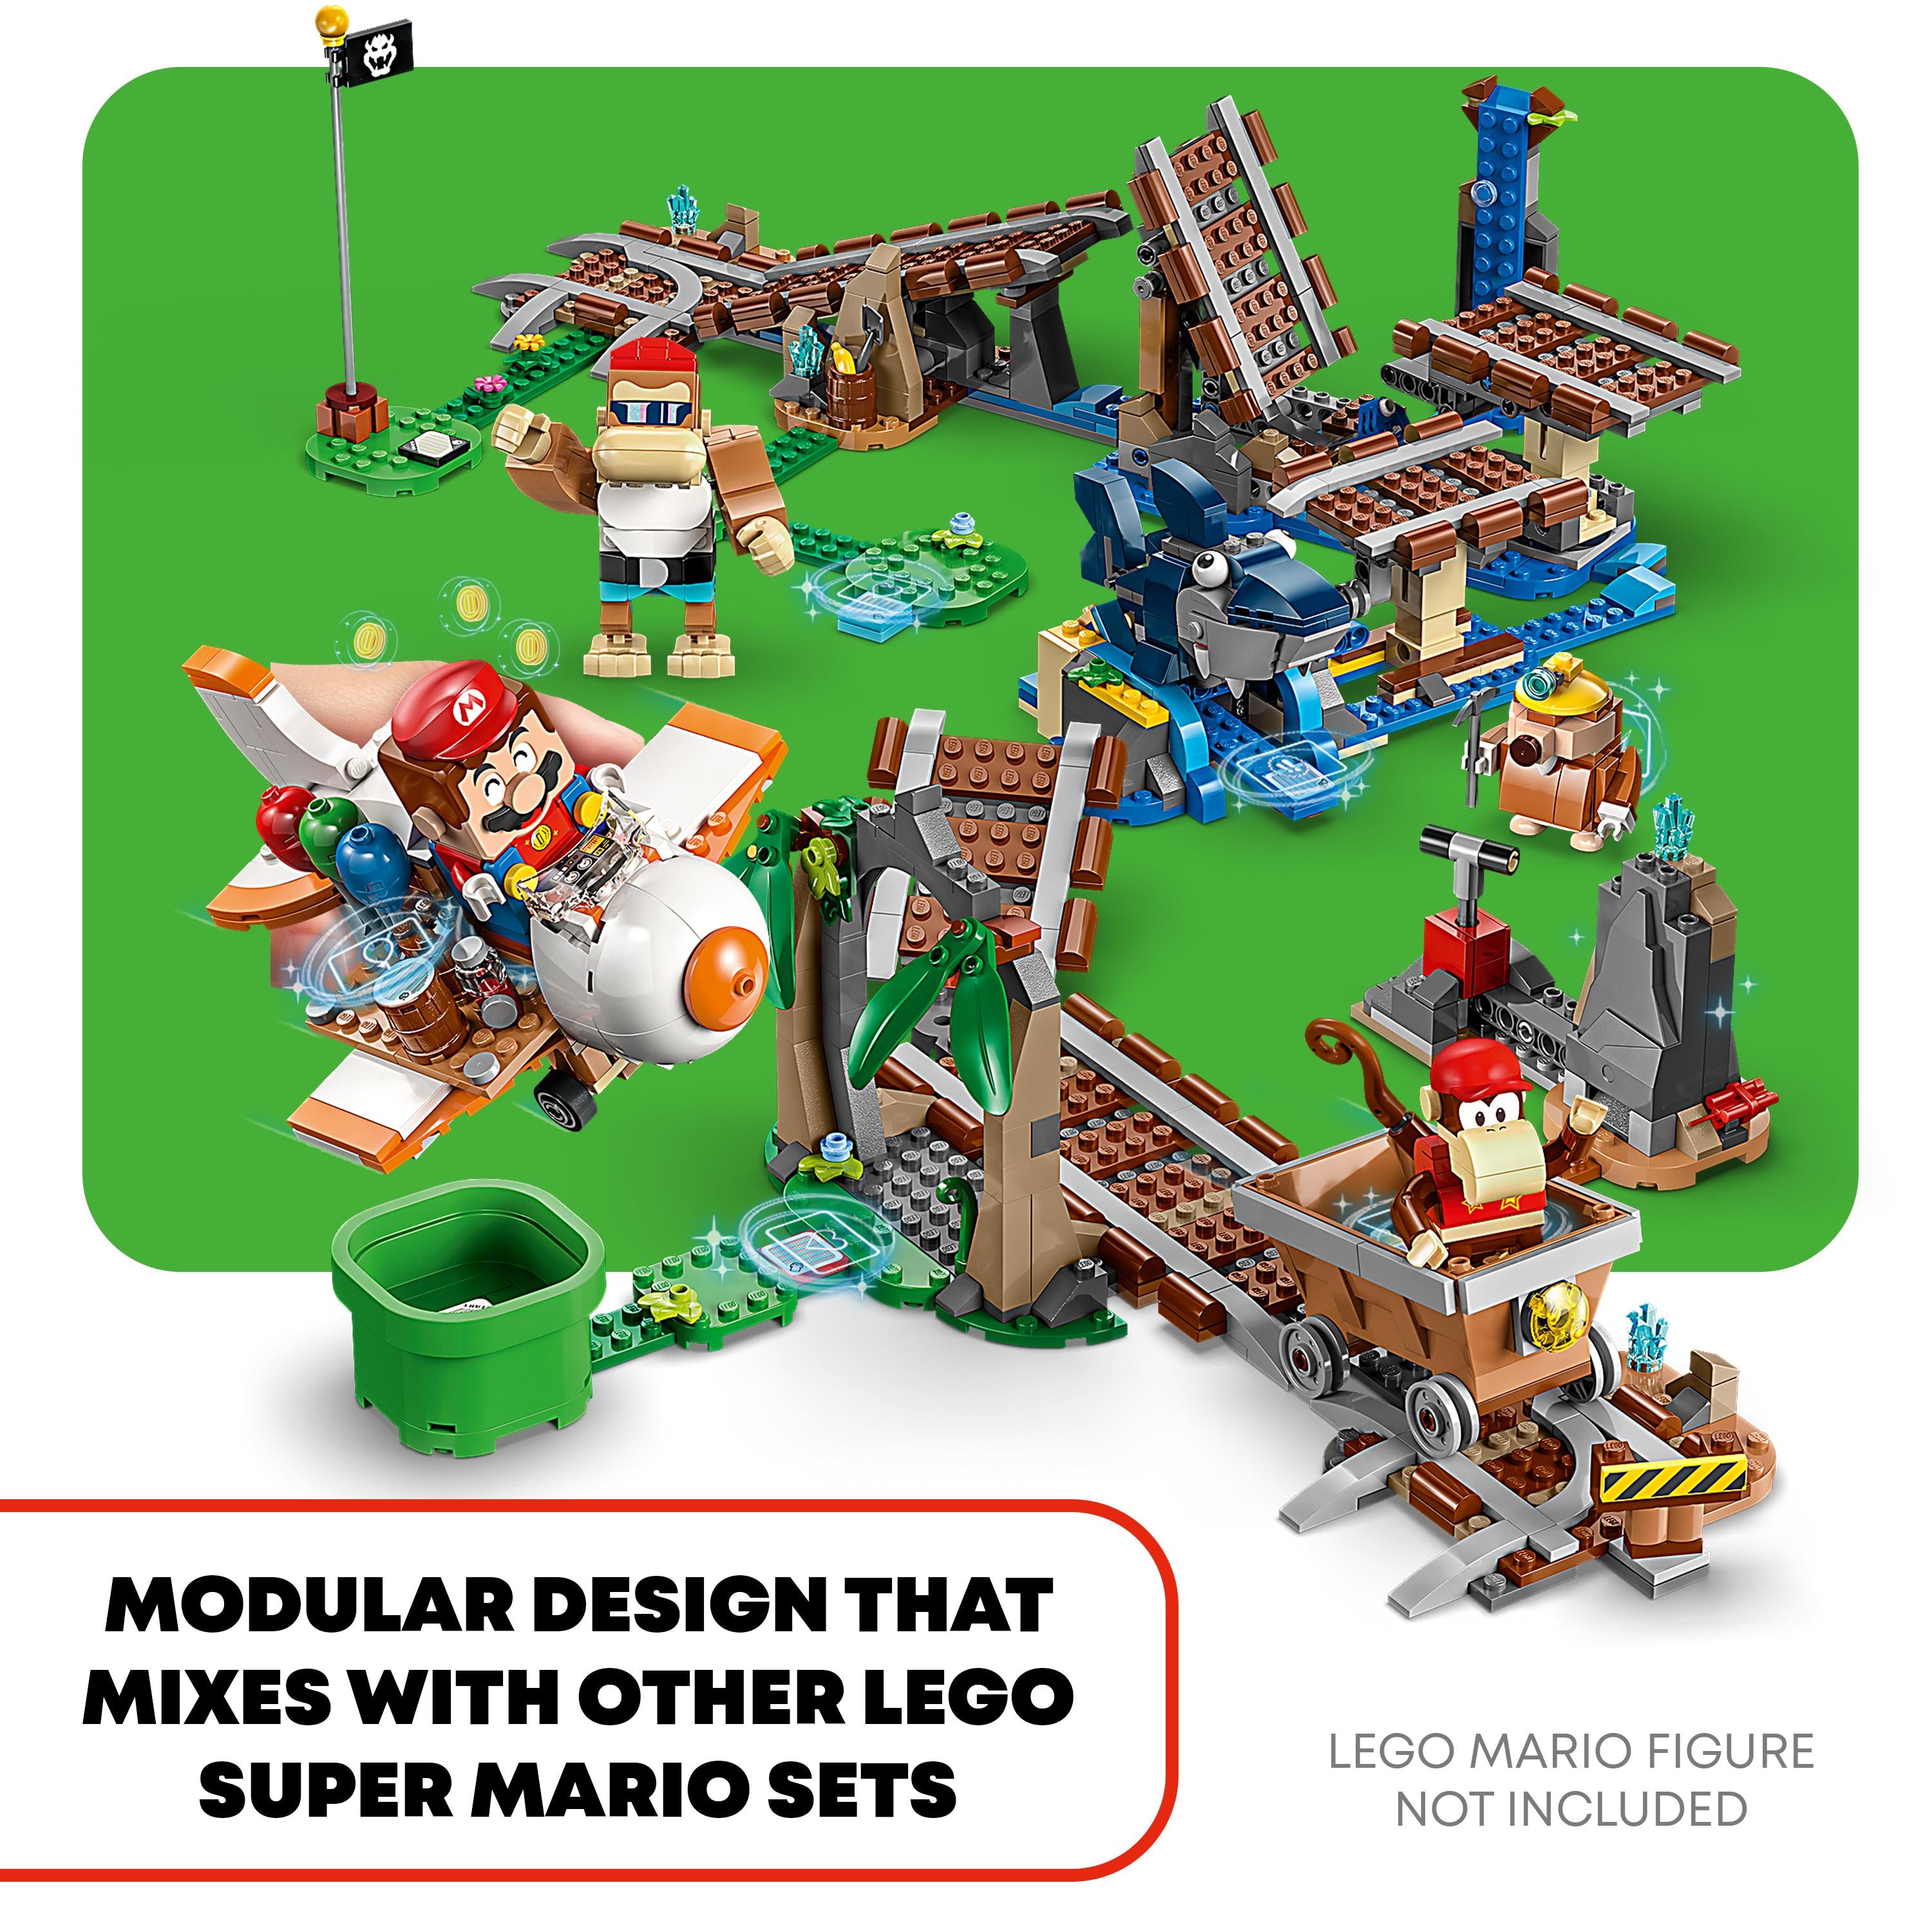 LEGO 71425 Super Mario Diddy Kong's Mine Cart Ride Expansion Set, Build and Play an Iconic Game Level with Toy Track Challenge, Buildable Aeroplane and 4 Character Figures, For Kids, Boys, Girls